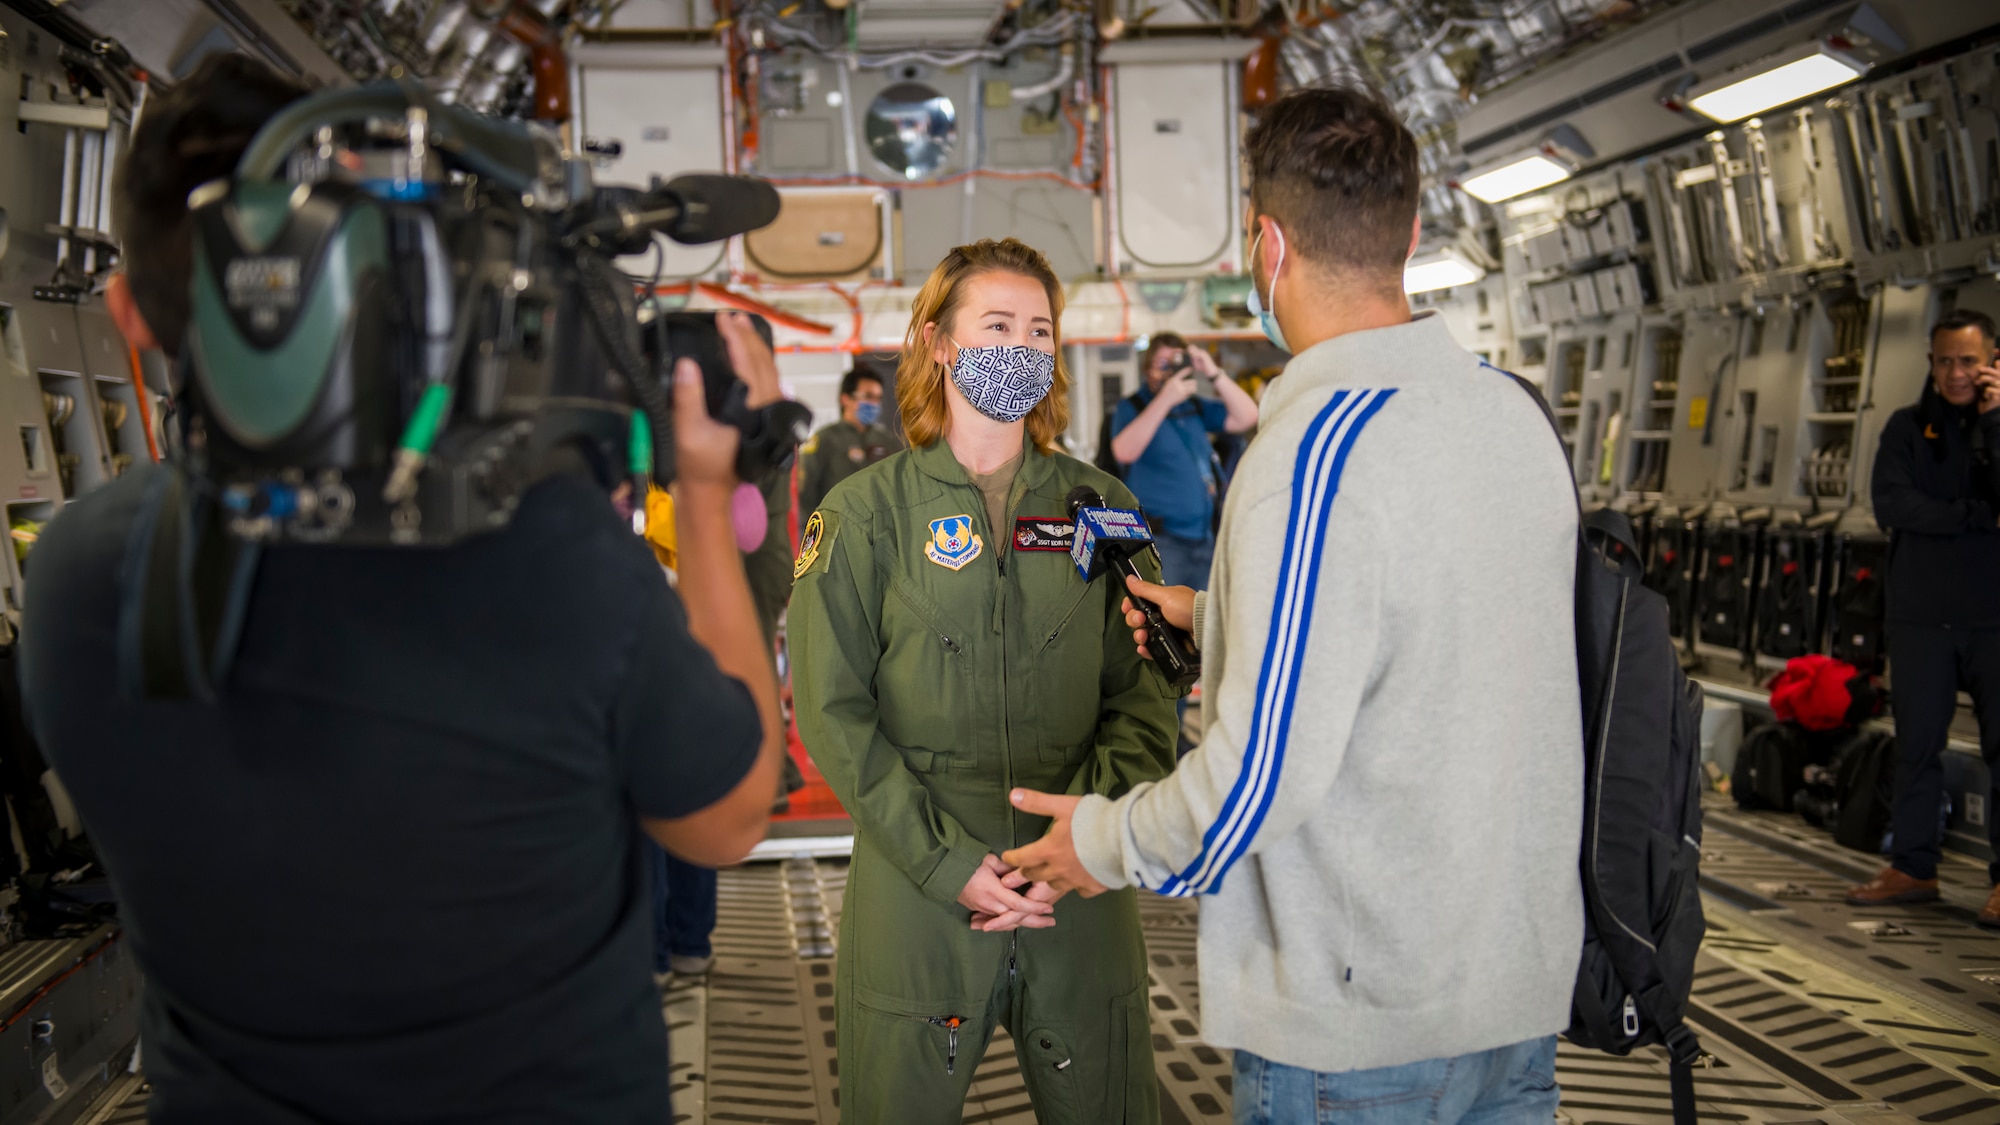 Staff Sgt. Kori Myers, 418th Flight Test Squadron C-17 load master, is interviewed by a local news agency prior to a media flight during the 2020 Aerospace Valley Air Show at Edwards Air Force Base, Oct. 9. (Air Force photo by Giancarlo Casem)